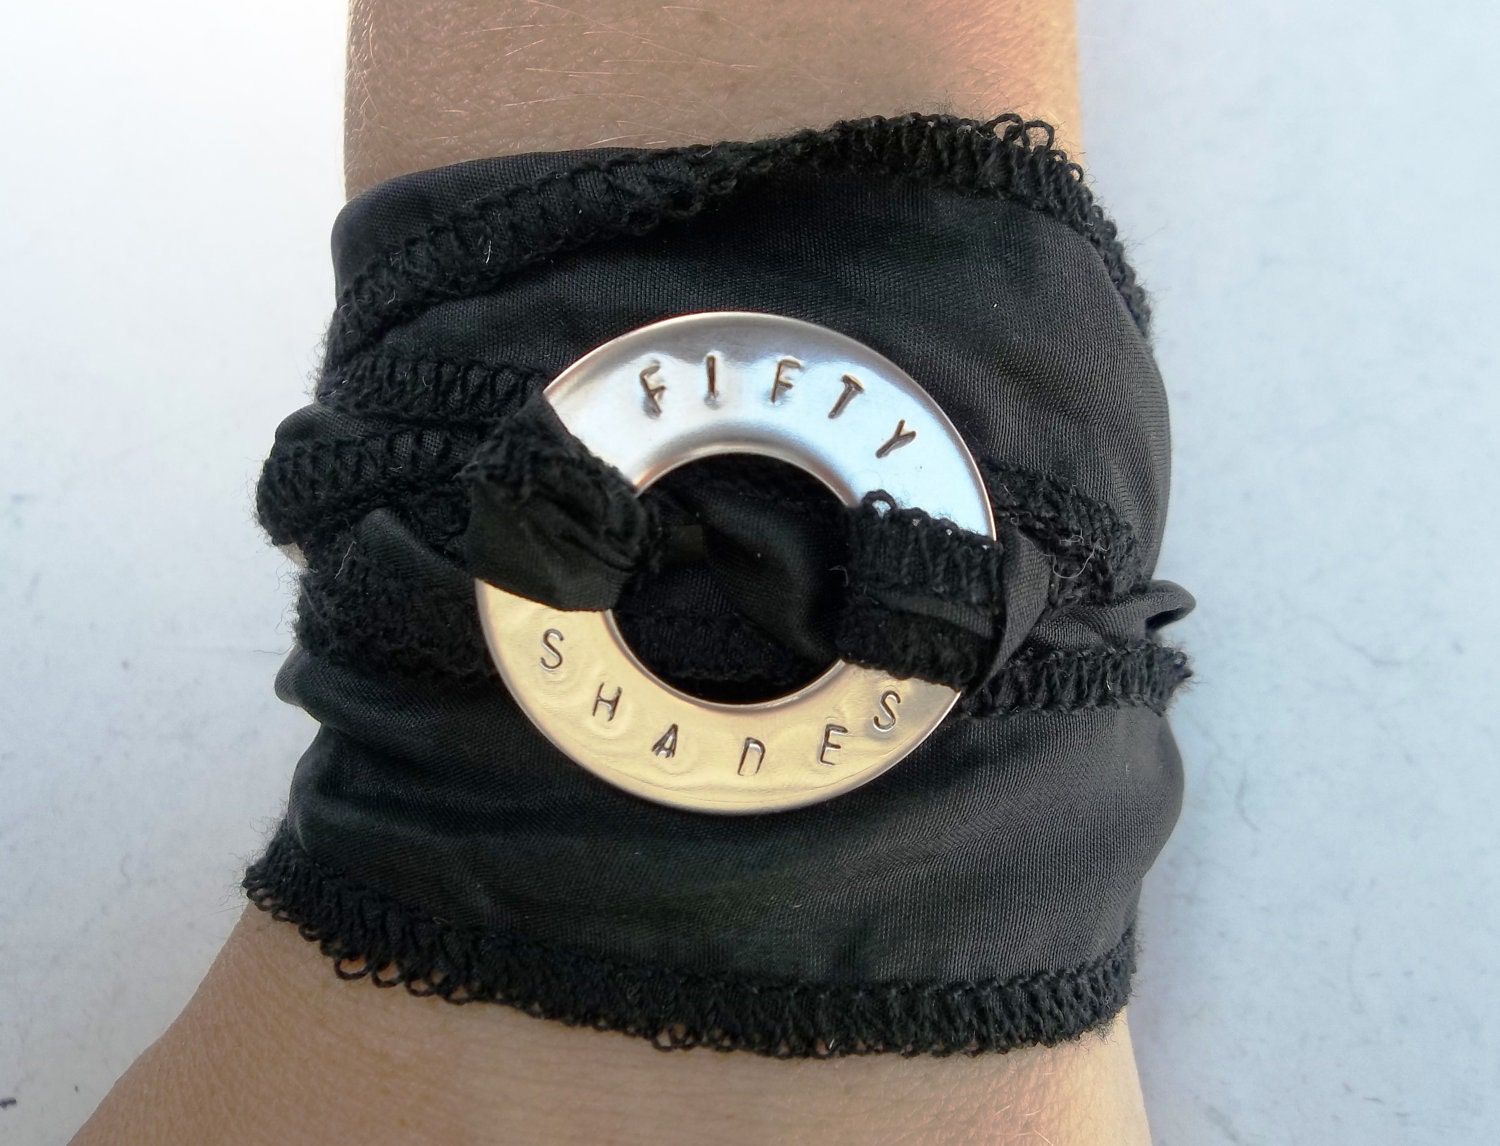 Fifty Shades Bondage Bracelet Silk Wrap-Around Hand Stamped Inspired by the Book